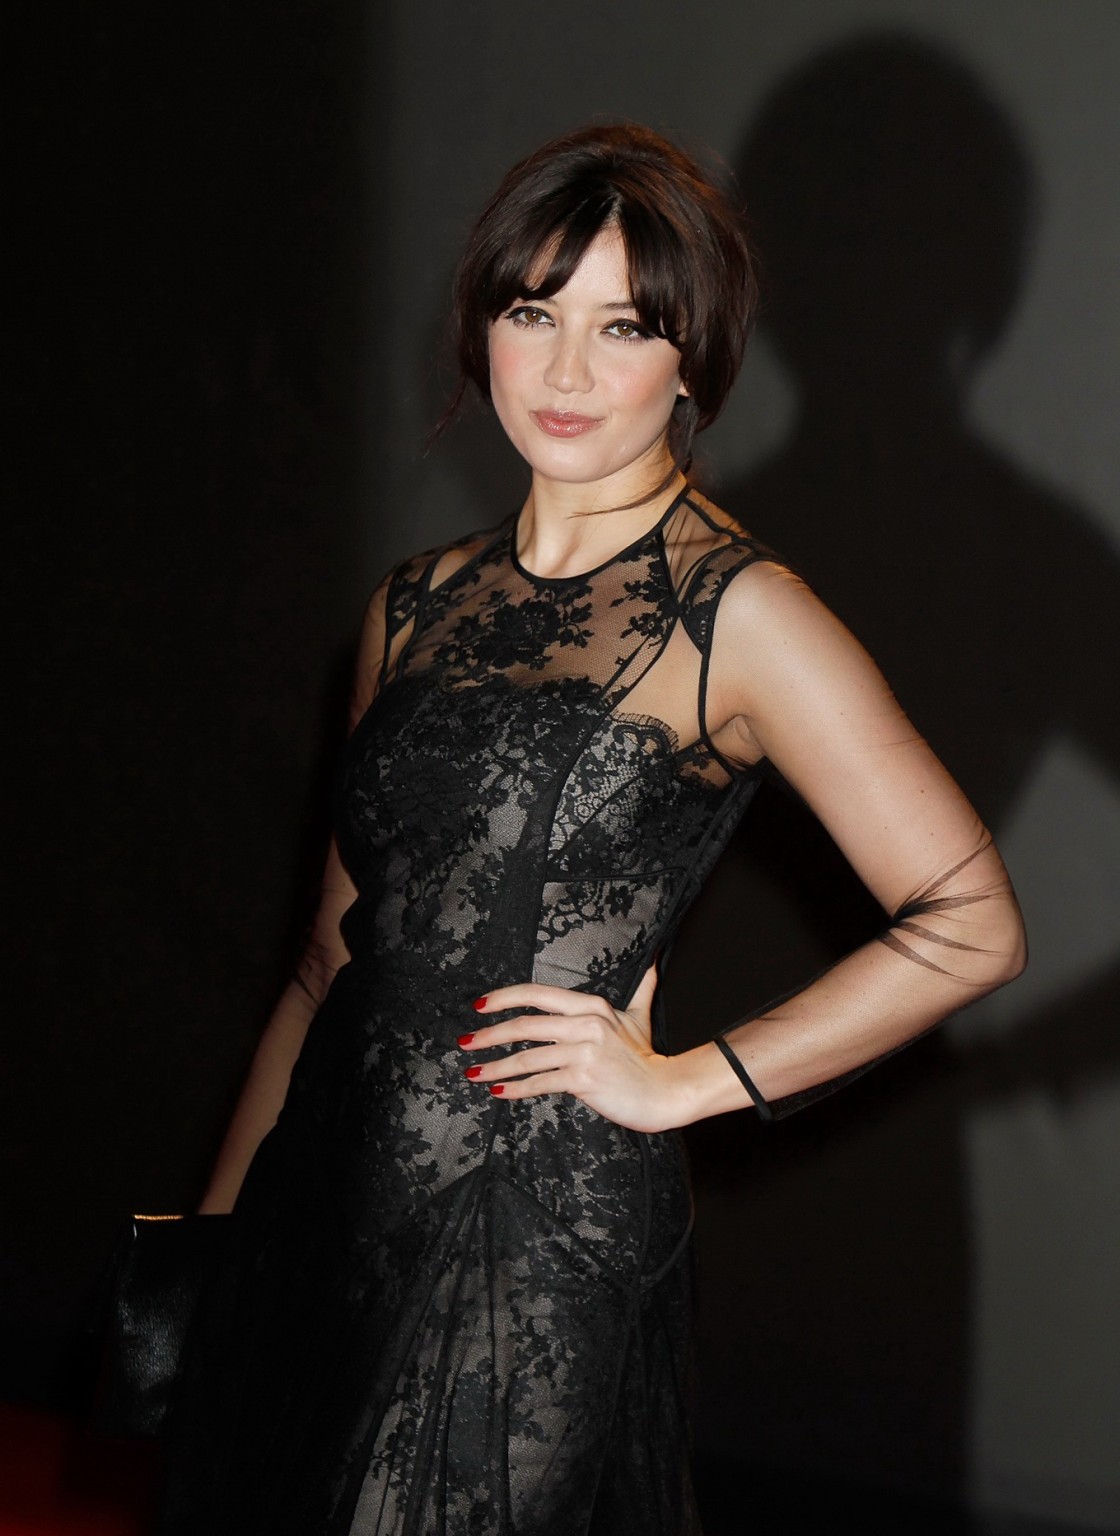 Daisy Lowe wearing black partially see-through dress at The British Fashion Awar #75211398